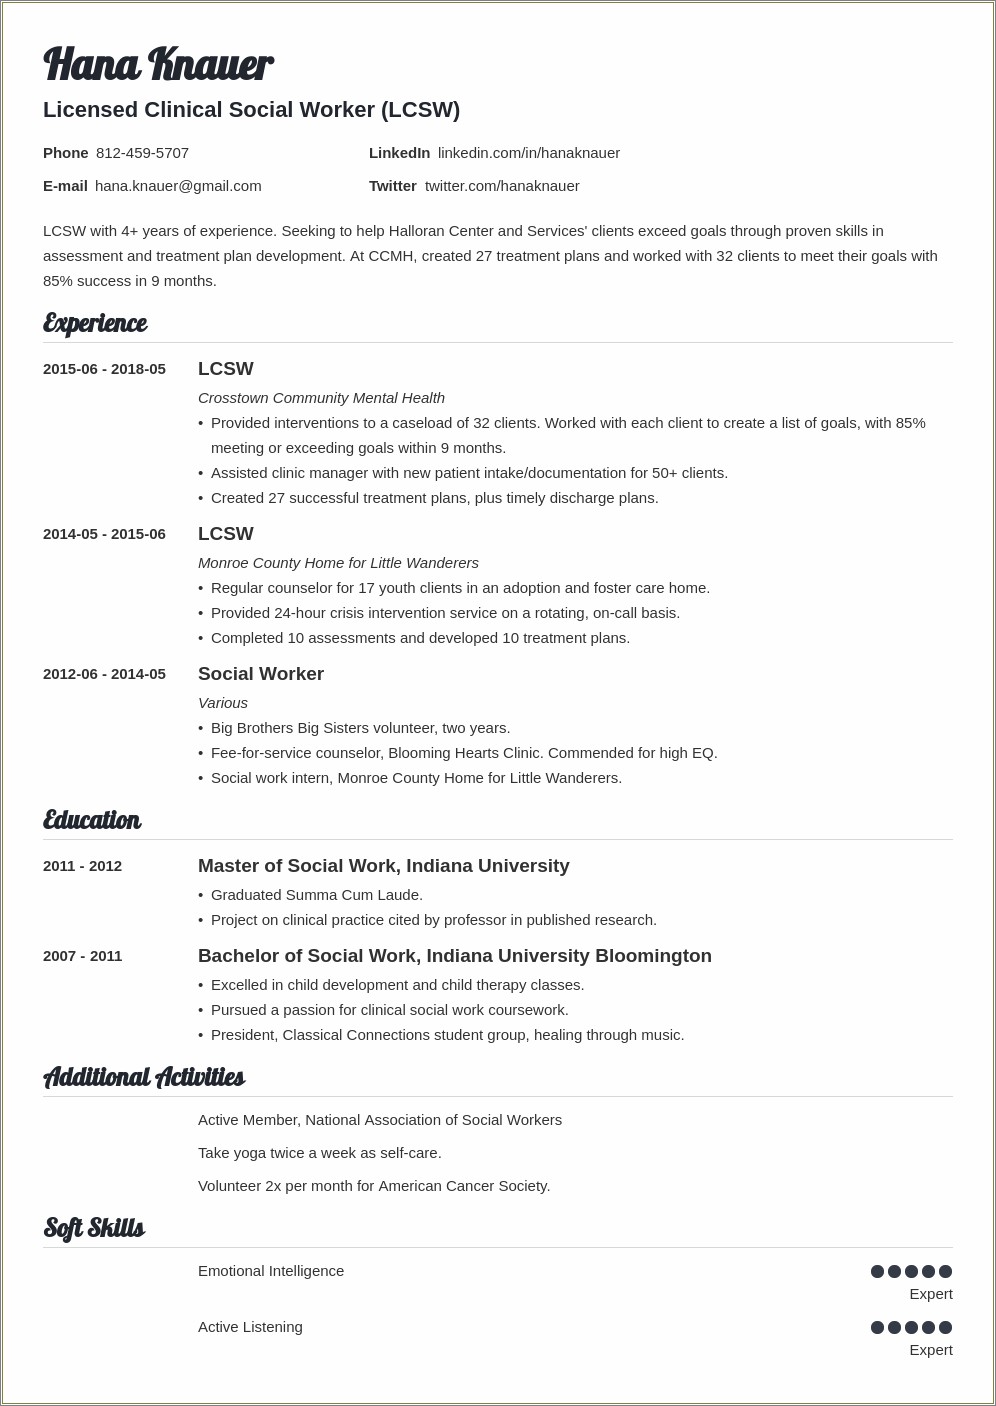 Sample Social Work Resume With Profile At Top